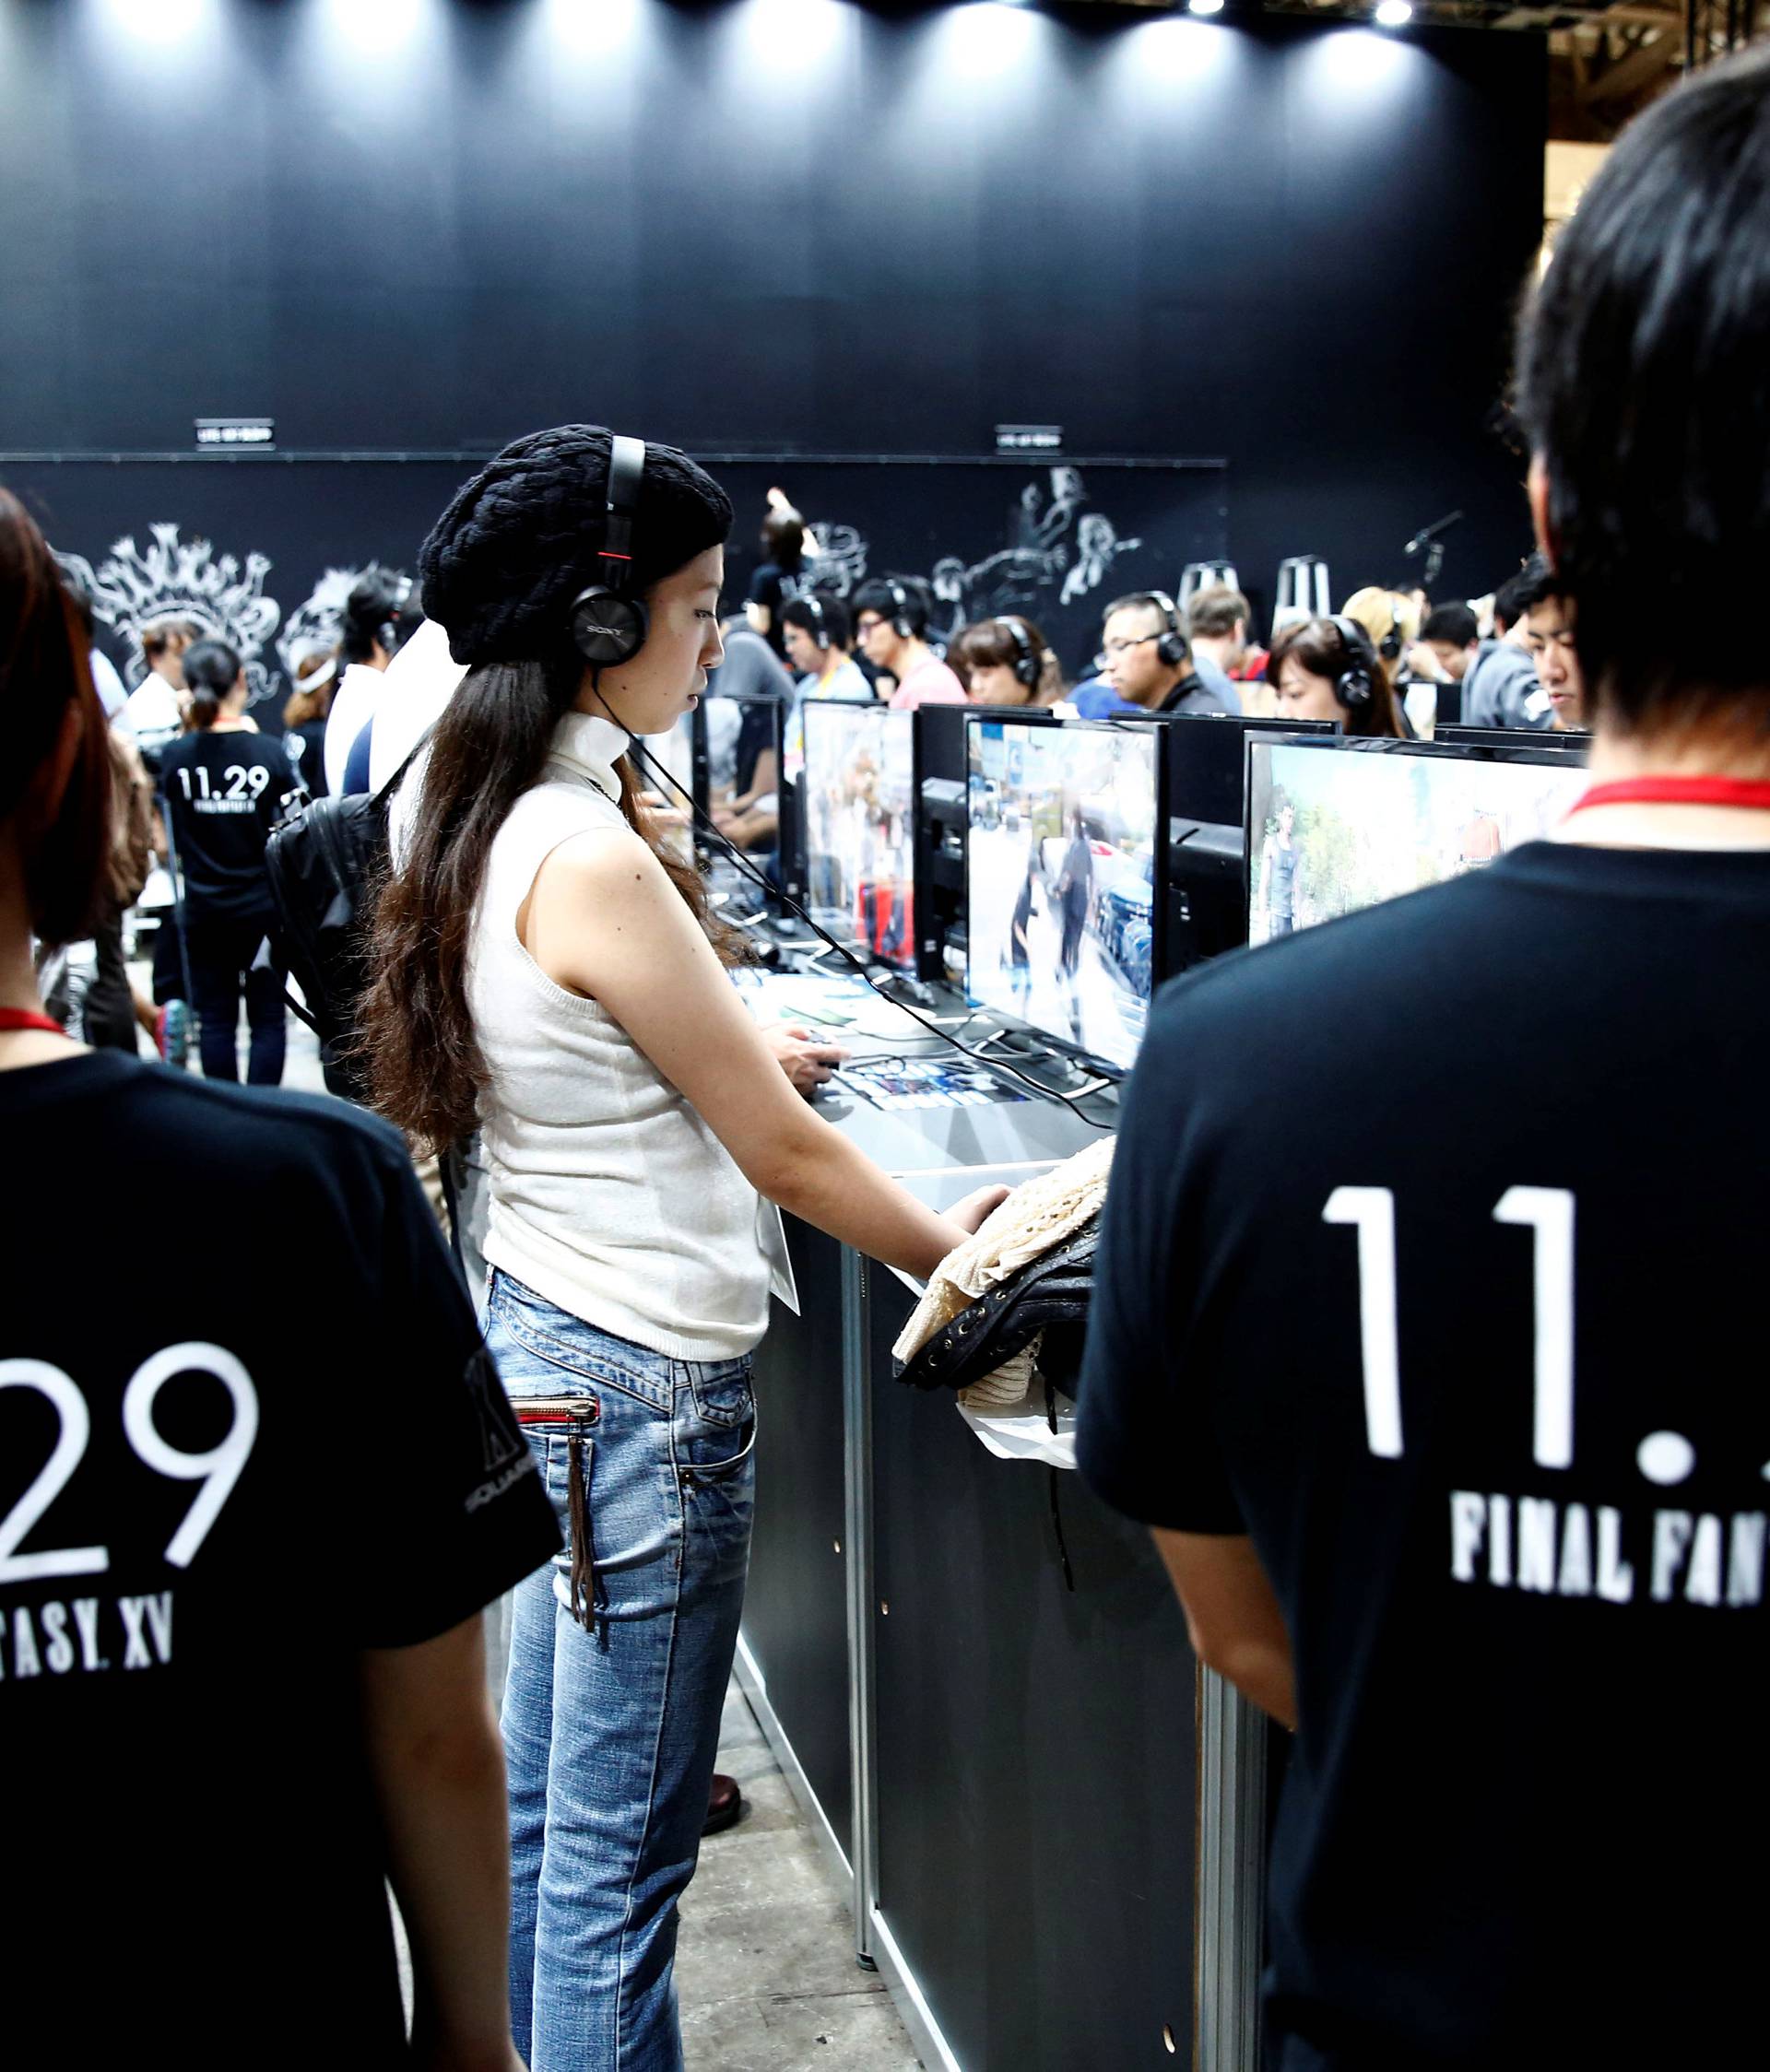 People play the video game 'Final Fantasy XV' at Tokyo Game Show 2016 in Chiba